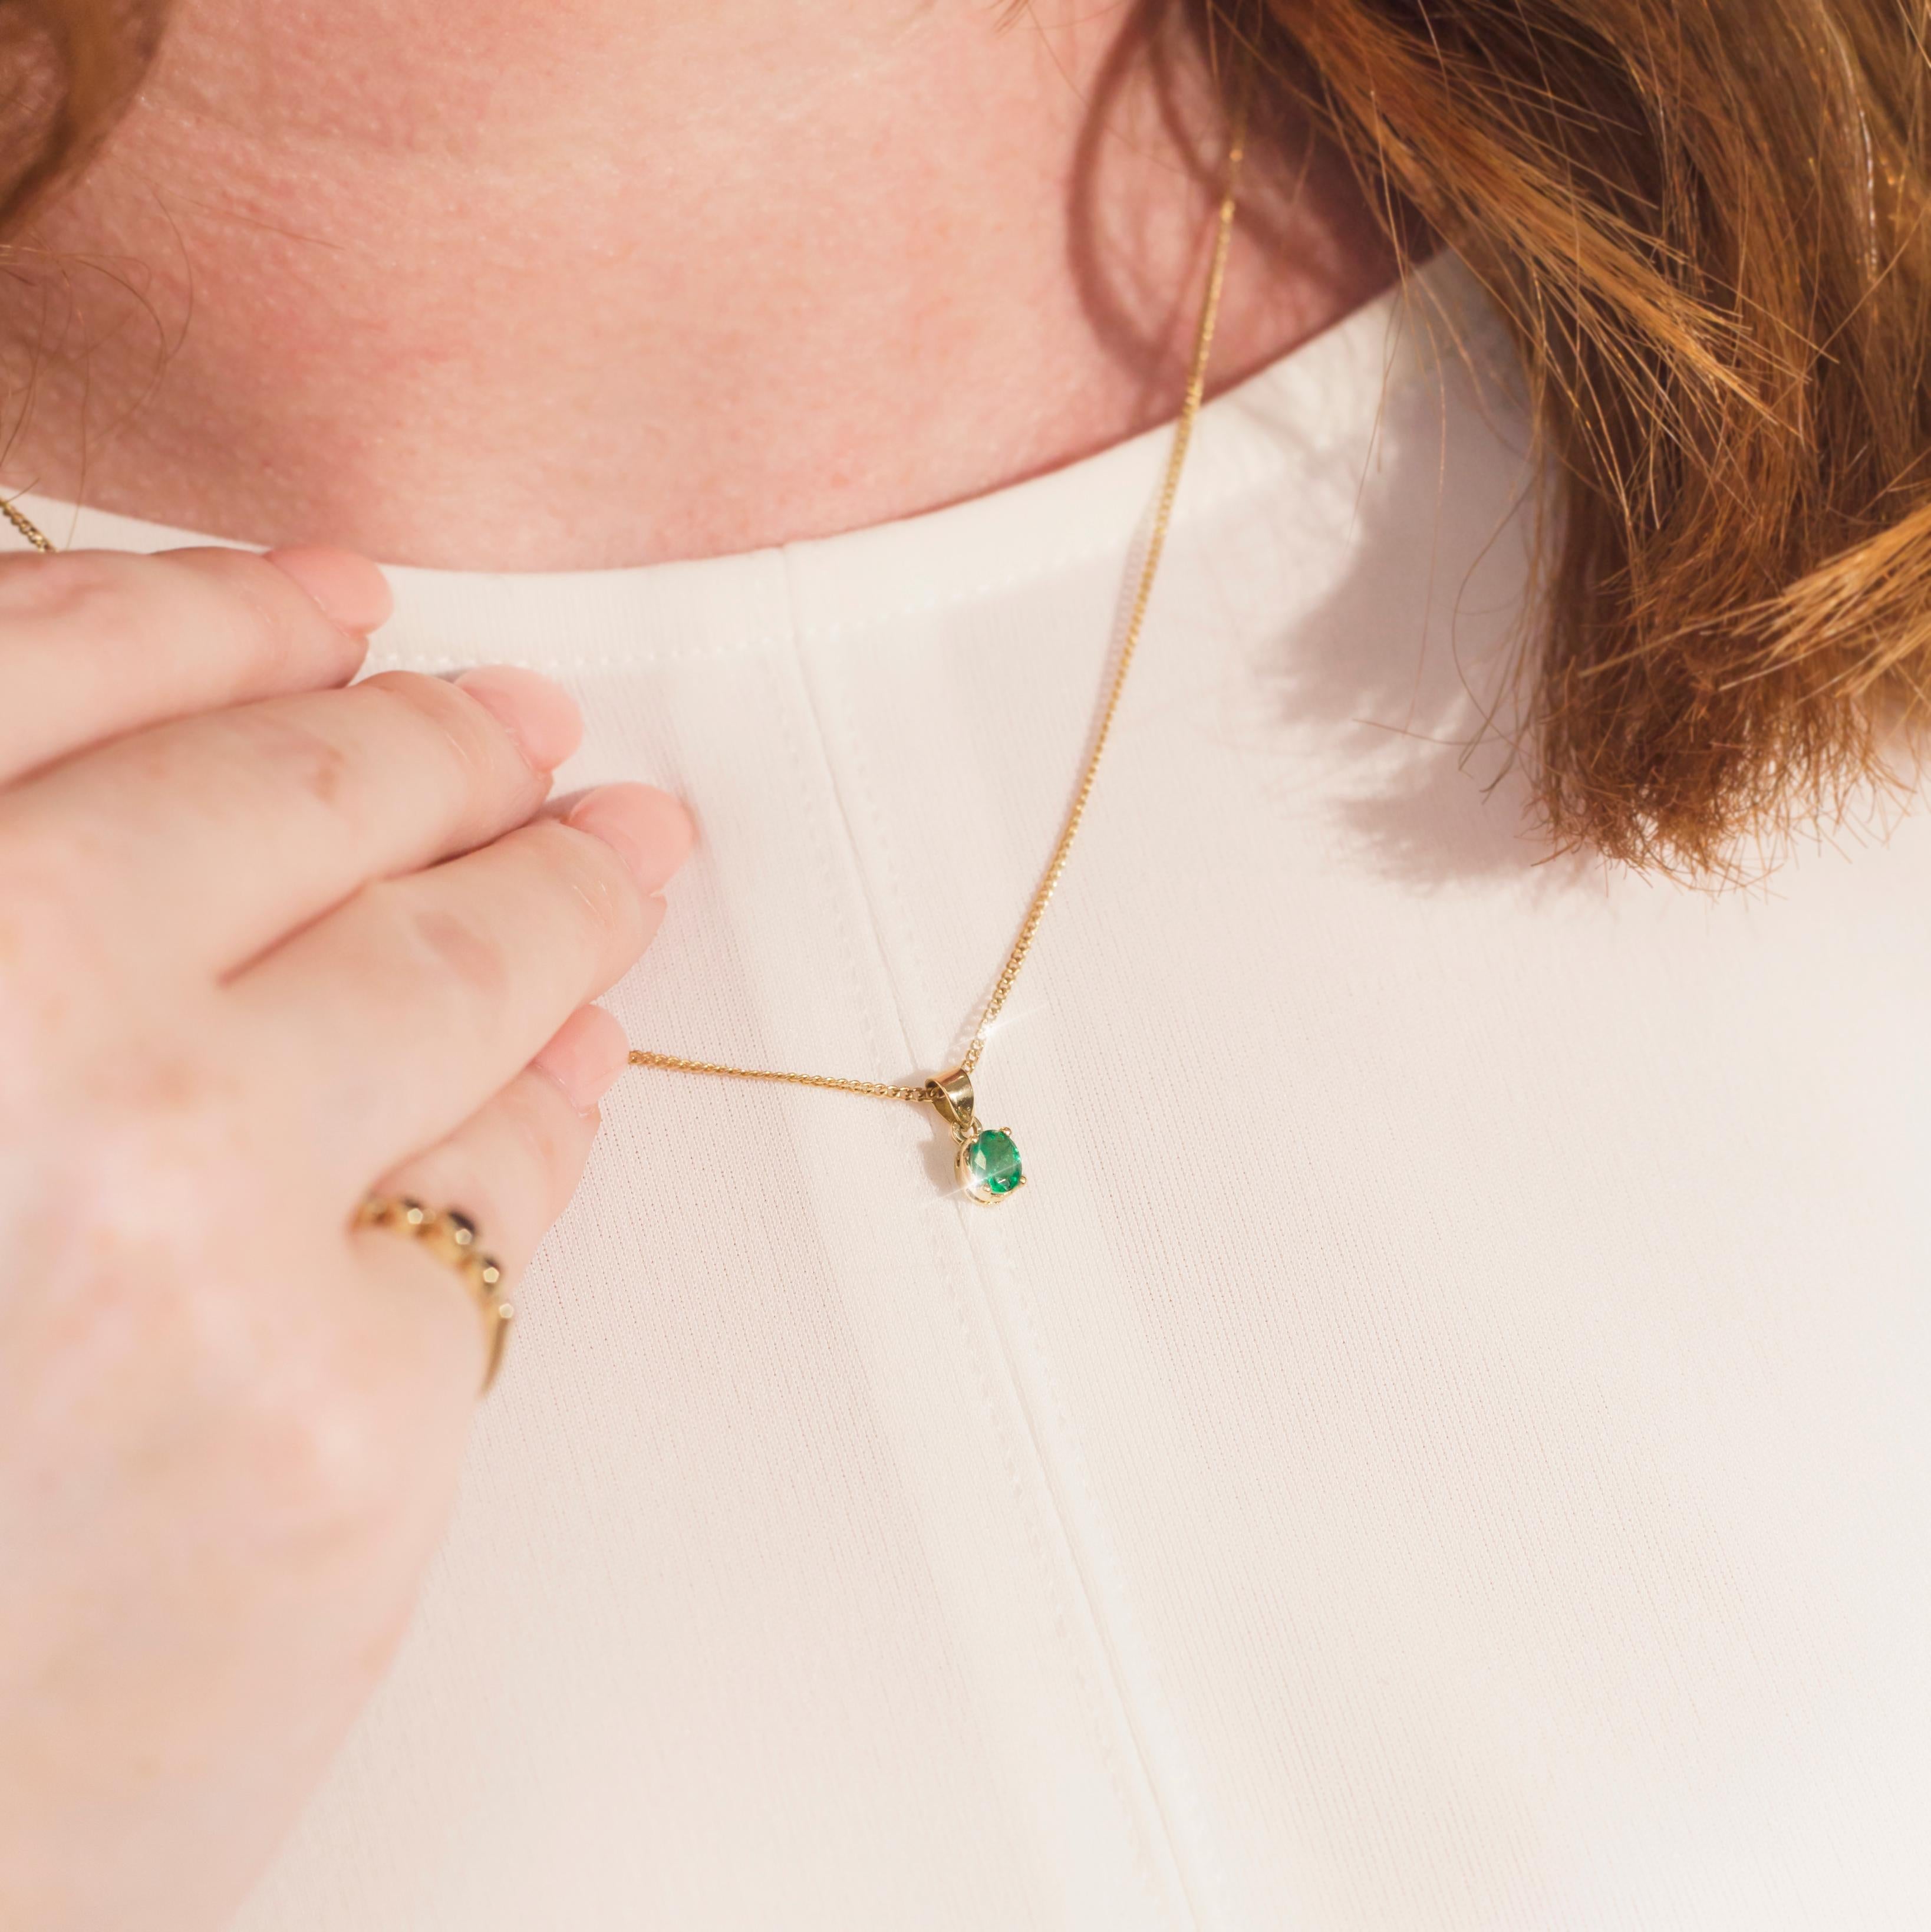 Lovingly crafted in 18 carat yellow gold, this petite vintage pendant and chain shows that simplicity and elegance can go hand-in-hand. The charming natural green oval cut emerald, resting in a lovely four claw setting, radiates gently, evoking